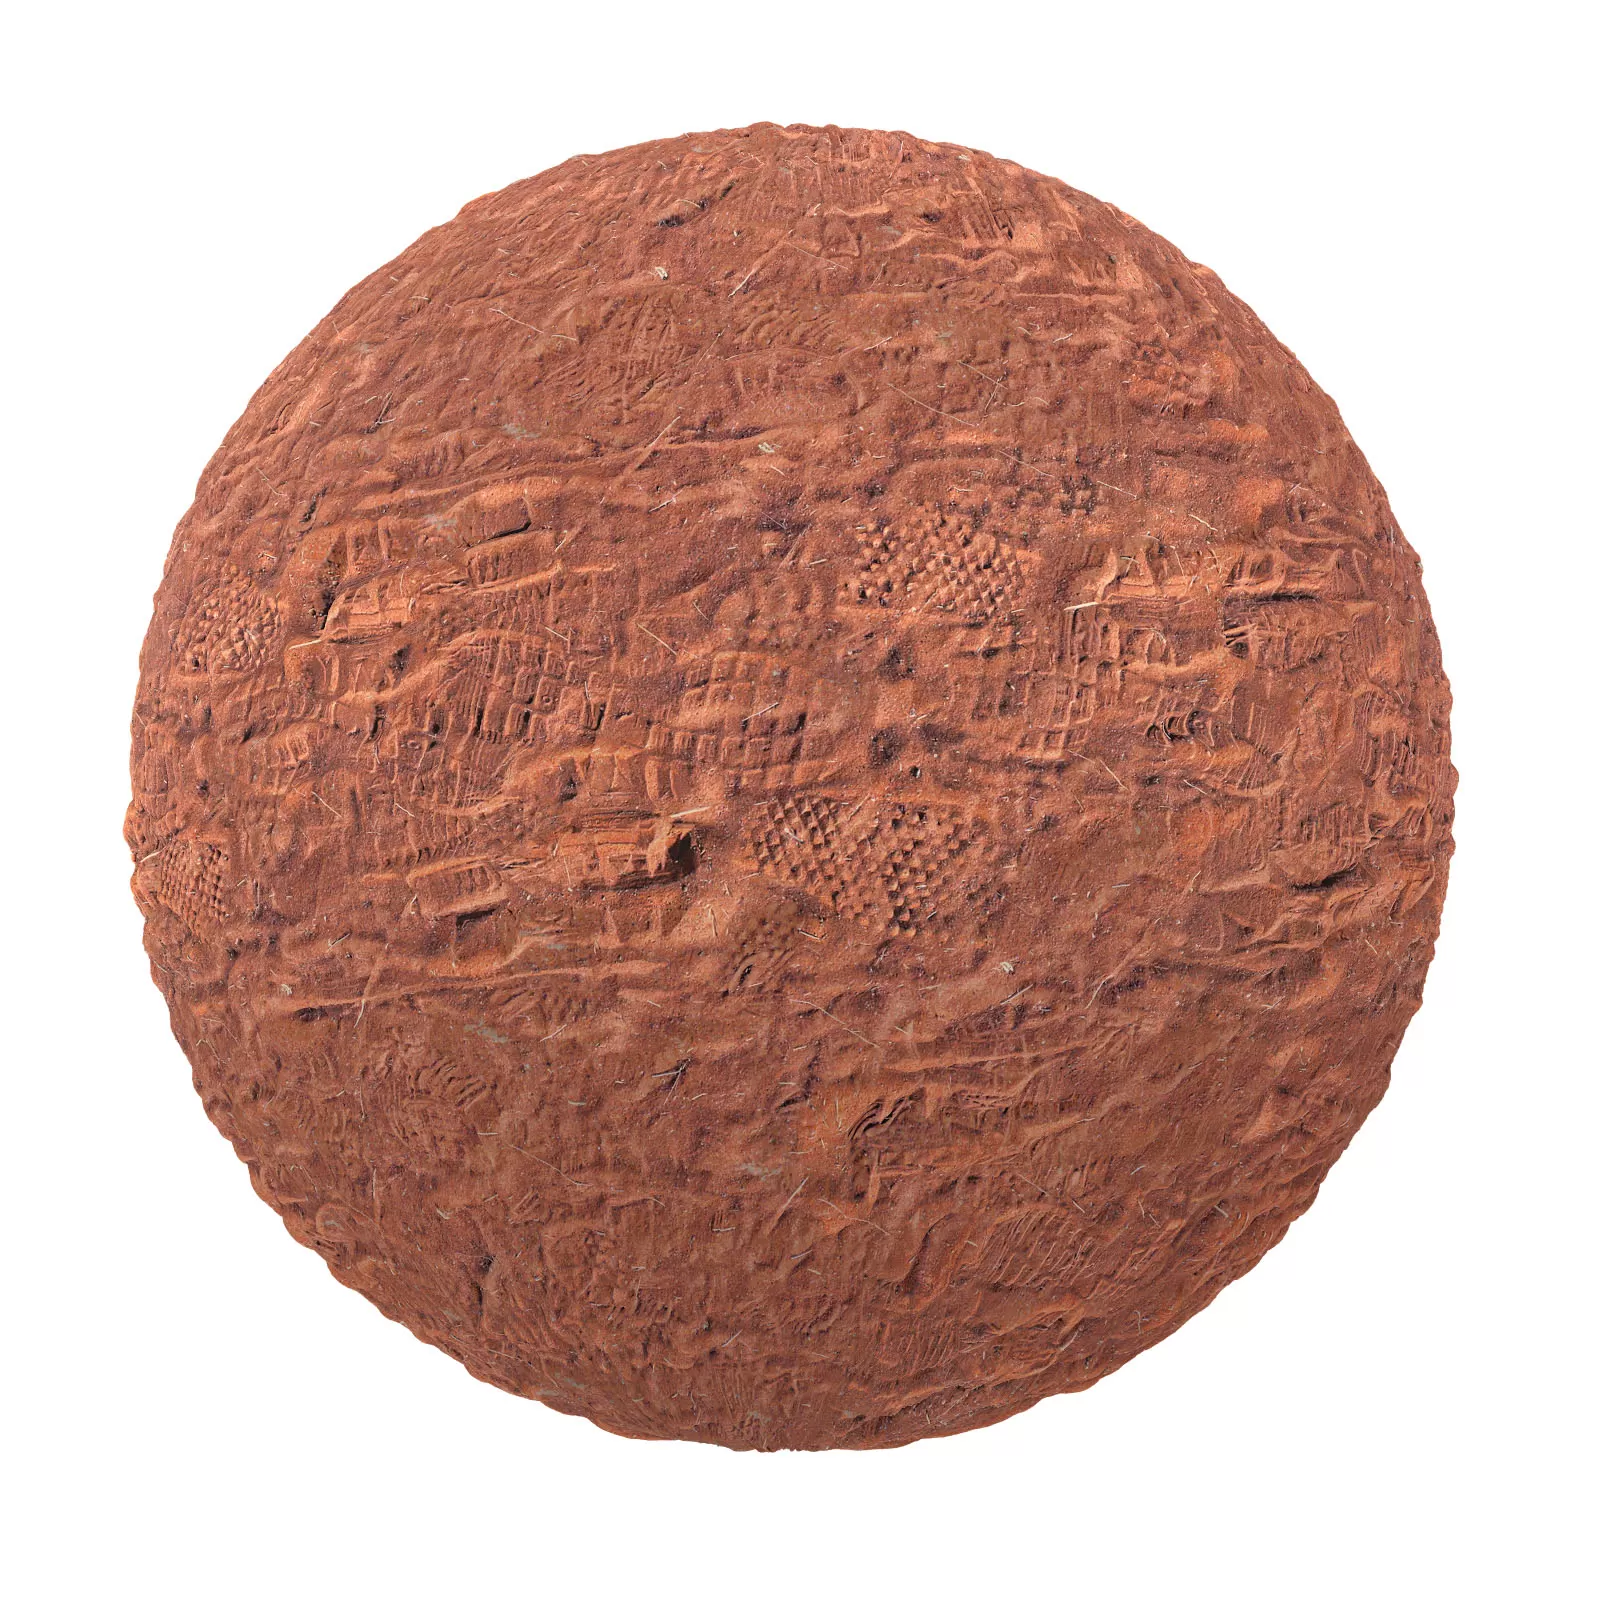 PBR CGAXIS TEXTURES – SOIL – Red Sand With Footprints